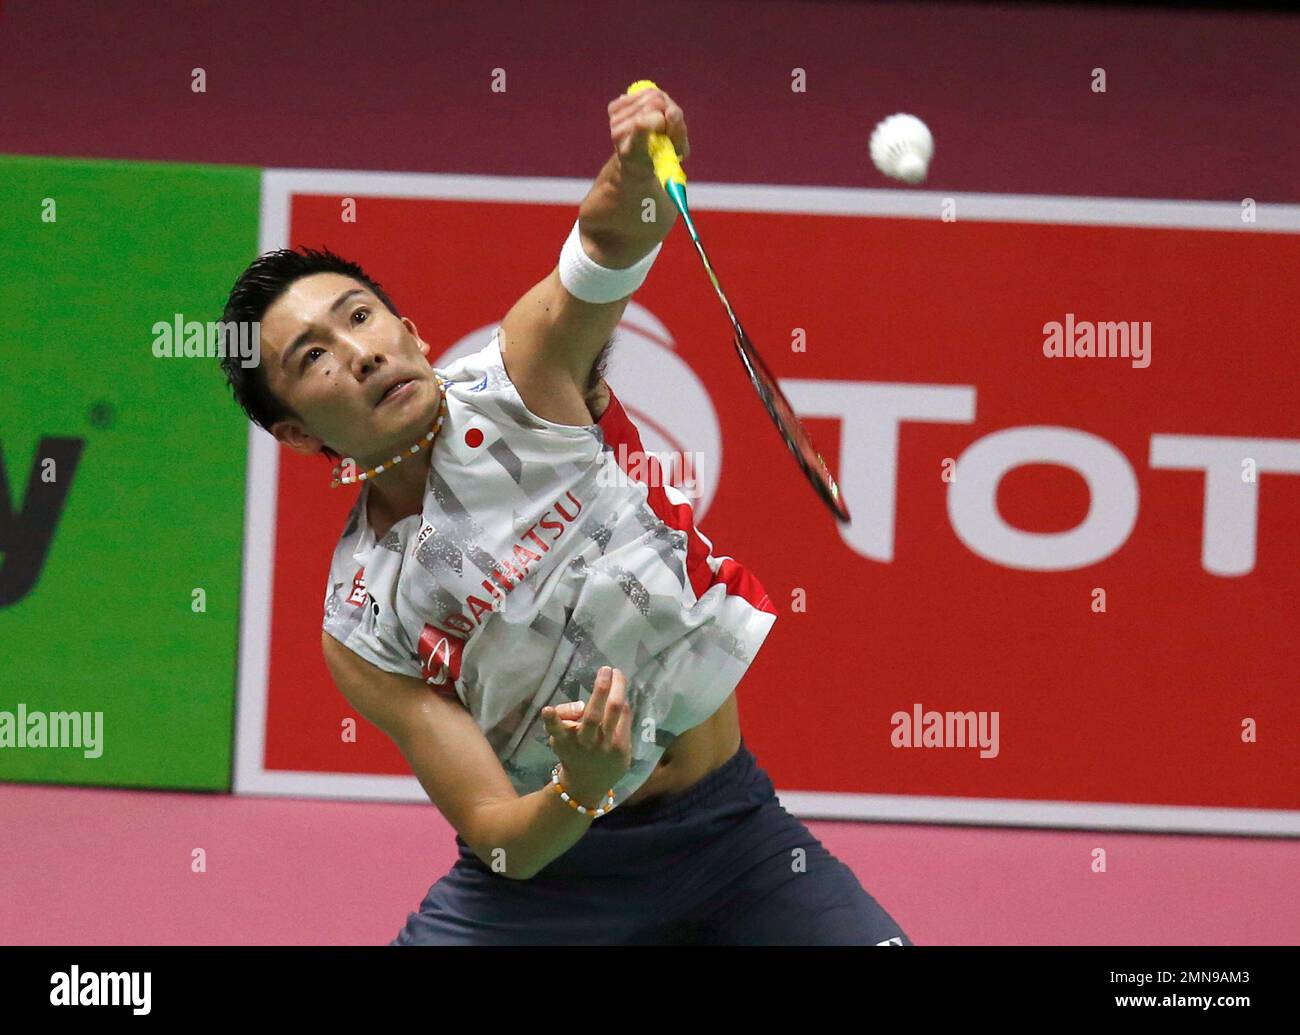 Kento Momota of Japan returns a shot to Jonatan Christie of Indonesia in their eighth-final match of mens singles during the YONEX-SUNRISE Hong Kong Stock Photo